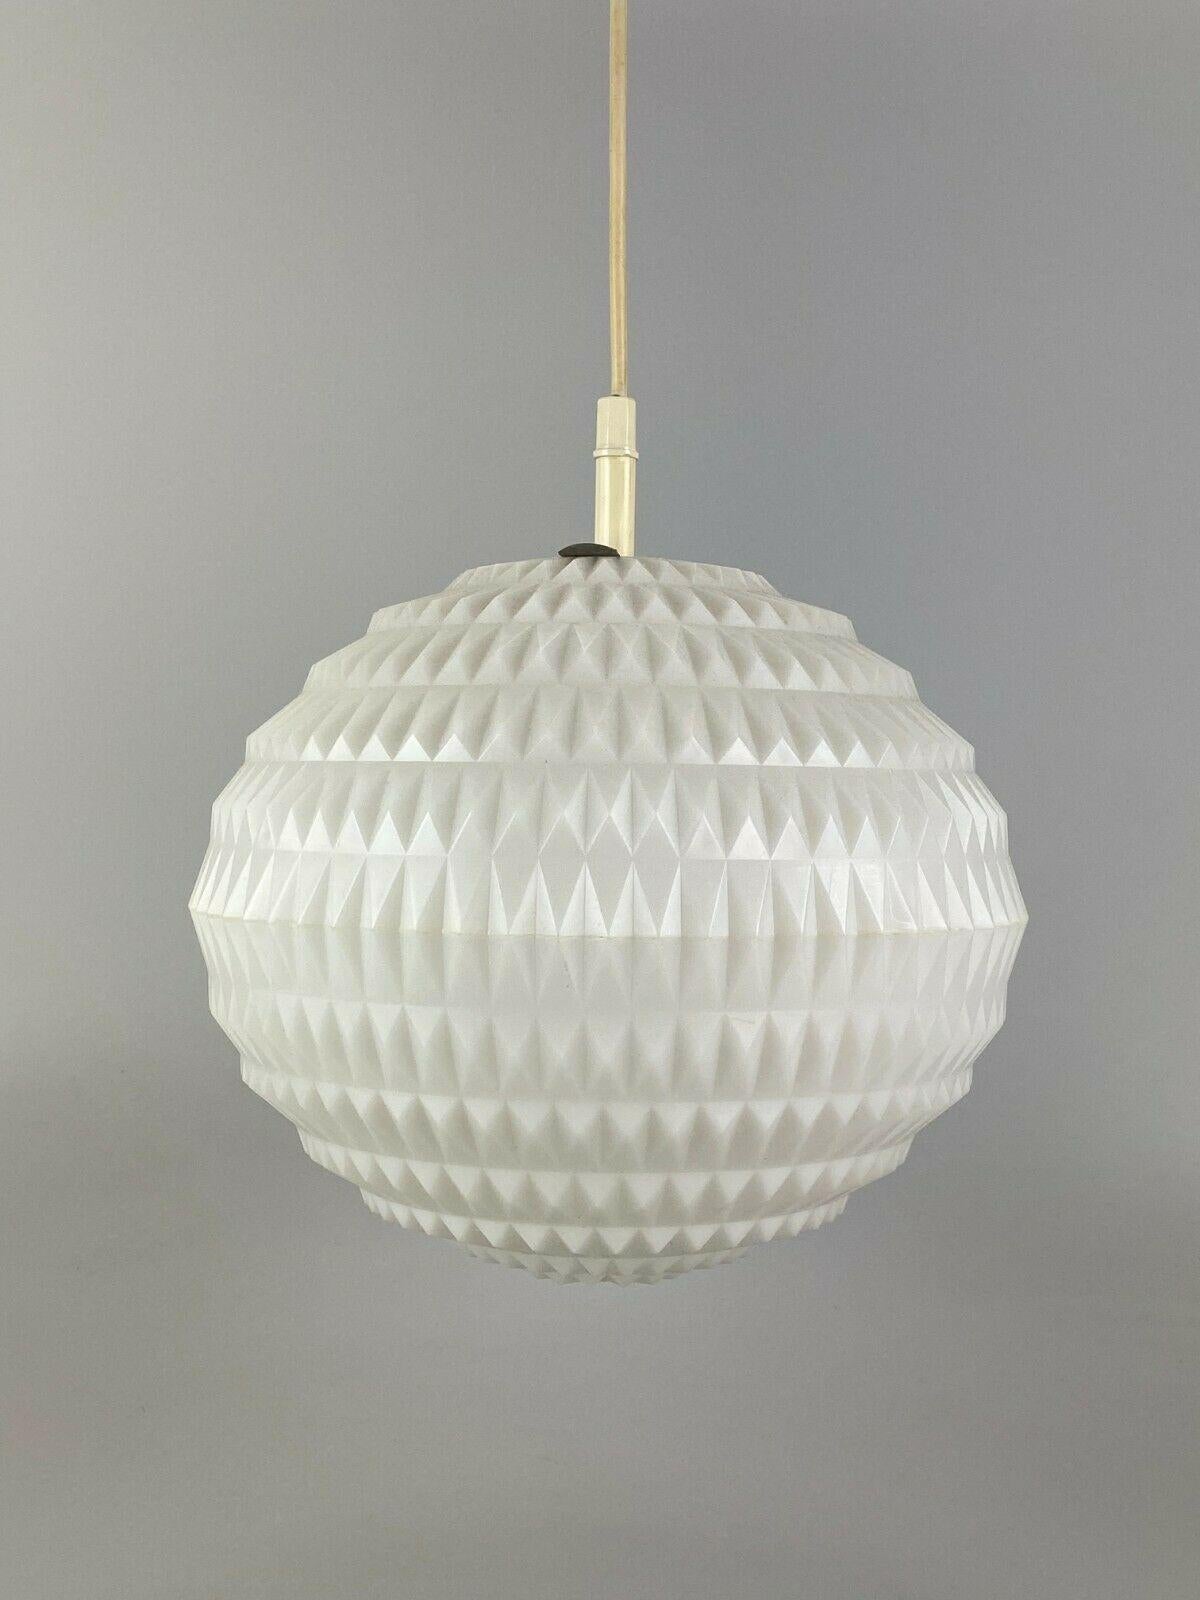 60s 70s Erco lamp light honeycomb ceiling lamp plastic space age design

Object: ceiling lamp

Manufacturer: Erco

Condition: good

Age: around 1960-1970

Dimensions:

Diameter = 28cm
Height = 25cm

Other notes:

The pictures serve